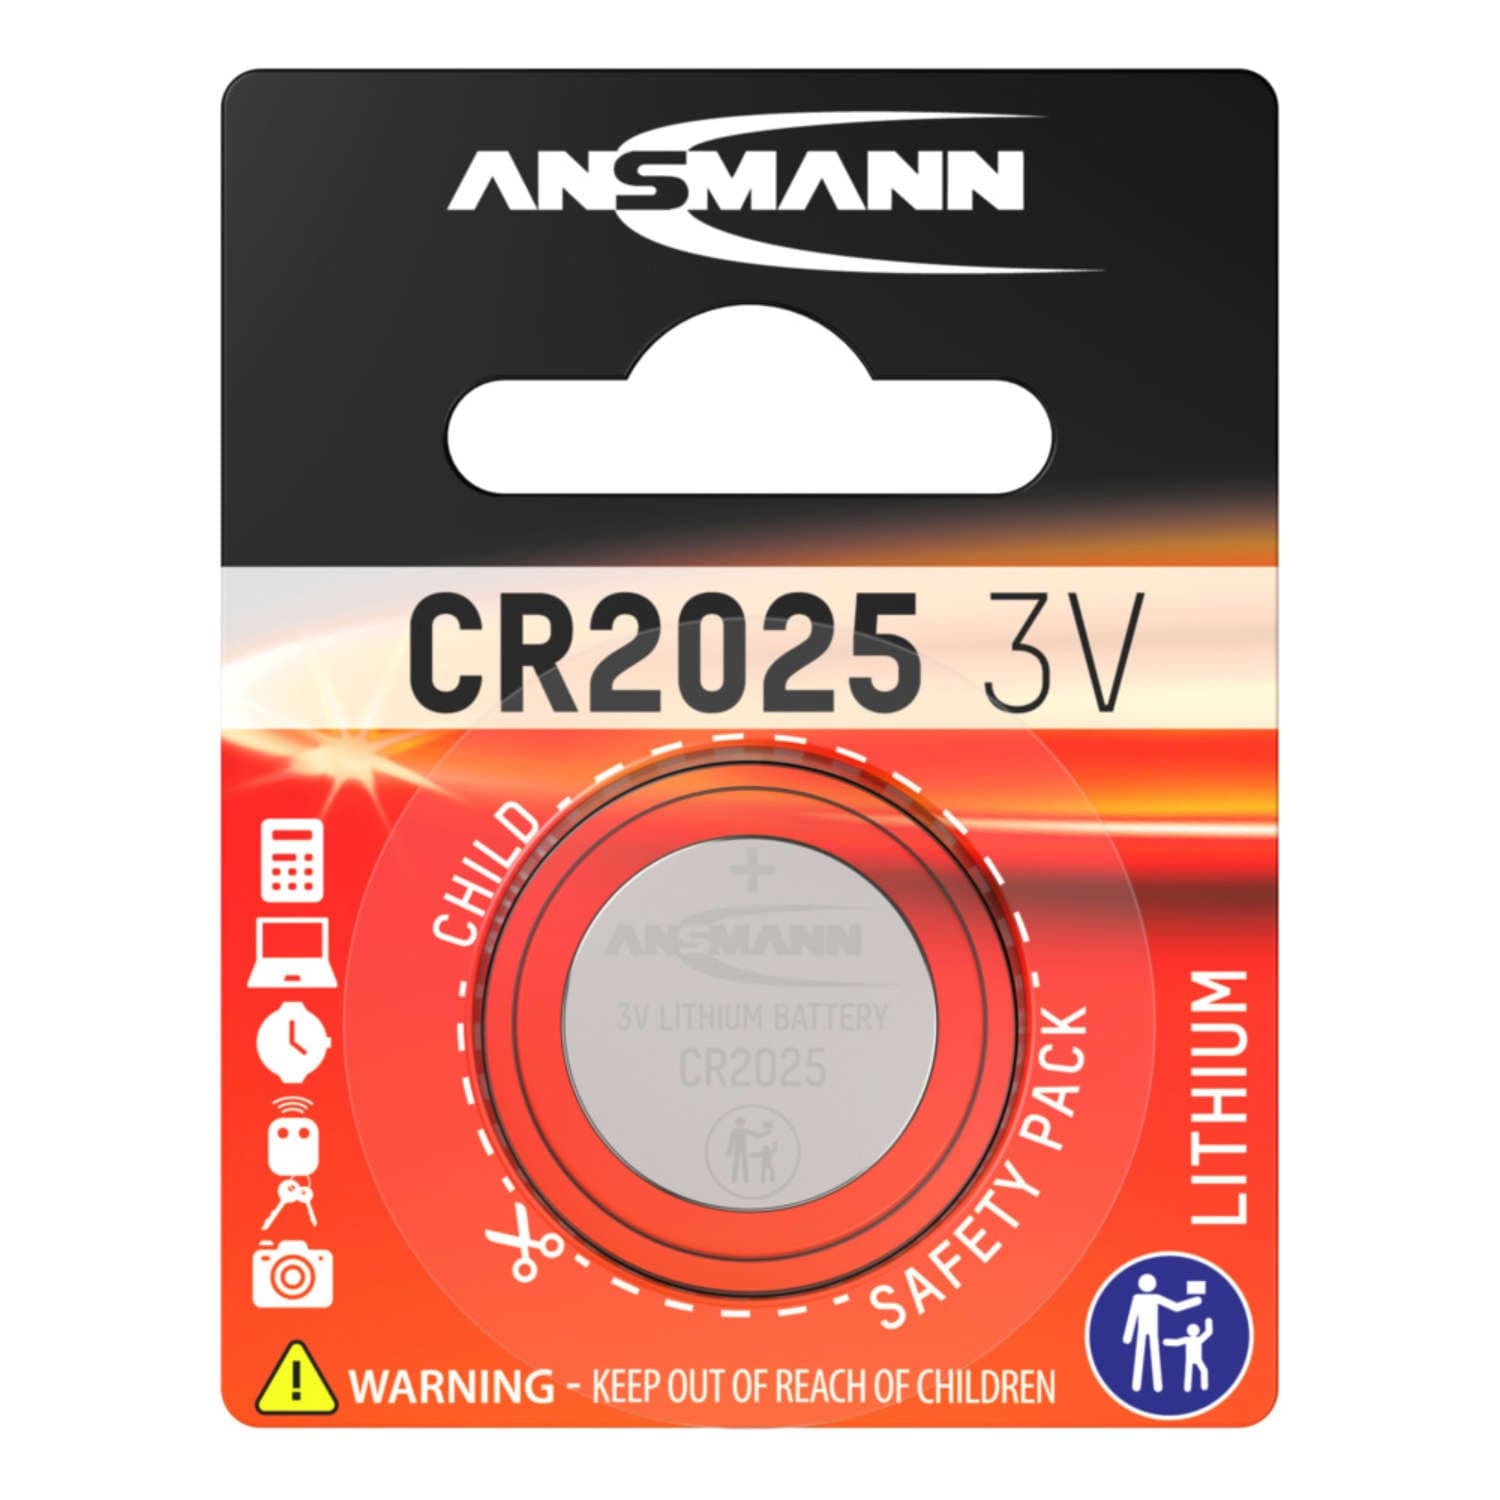 CR2025 3V Lithium Coin Cell Battery - The Pi Hut